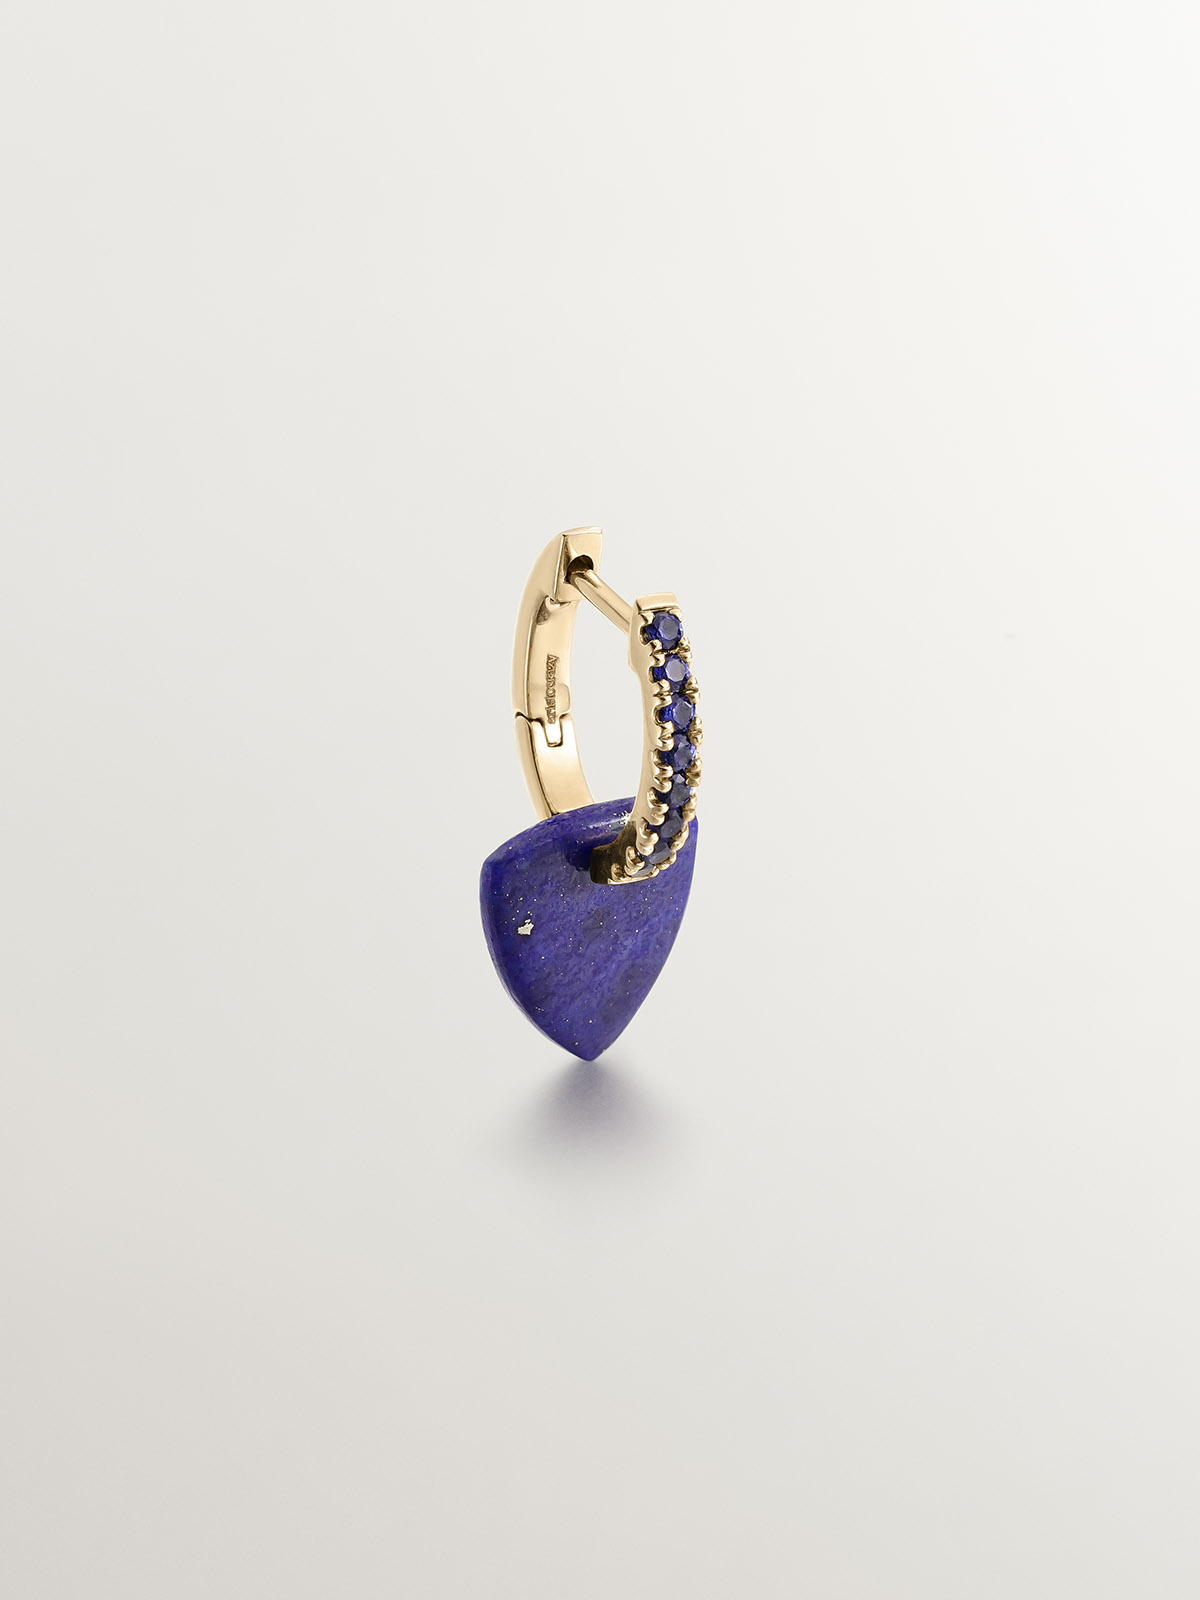 9K yellow gold single hoop earring with blue sapphires and blue lapis lazuli pendant